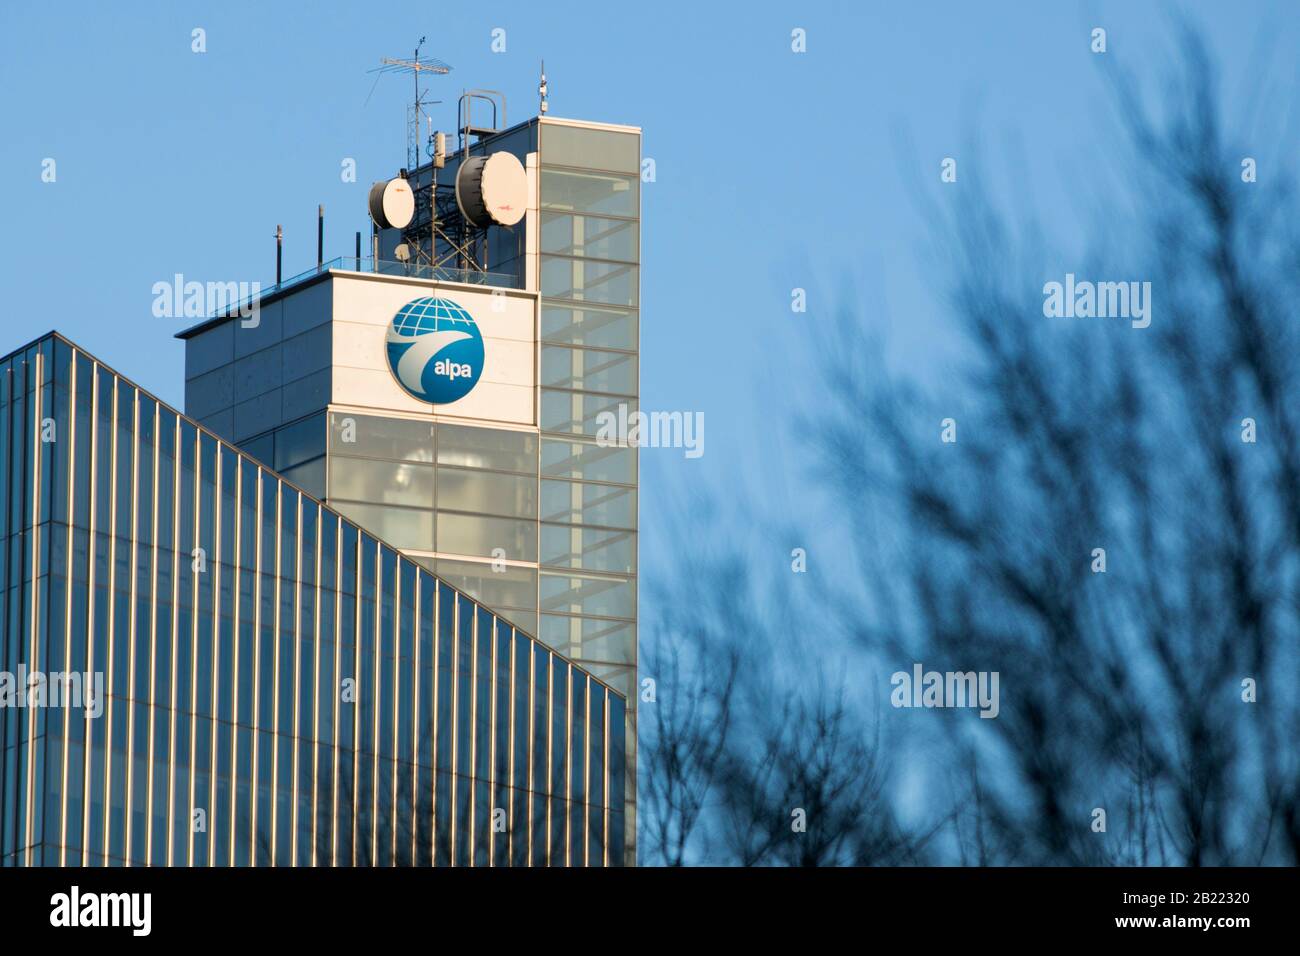 A logo sign outside of the headquarters of The Air Line Pilots Association (ALPA) in Tysons, Virginia, on February 23, 2020. Stock Photo